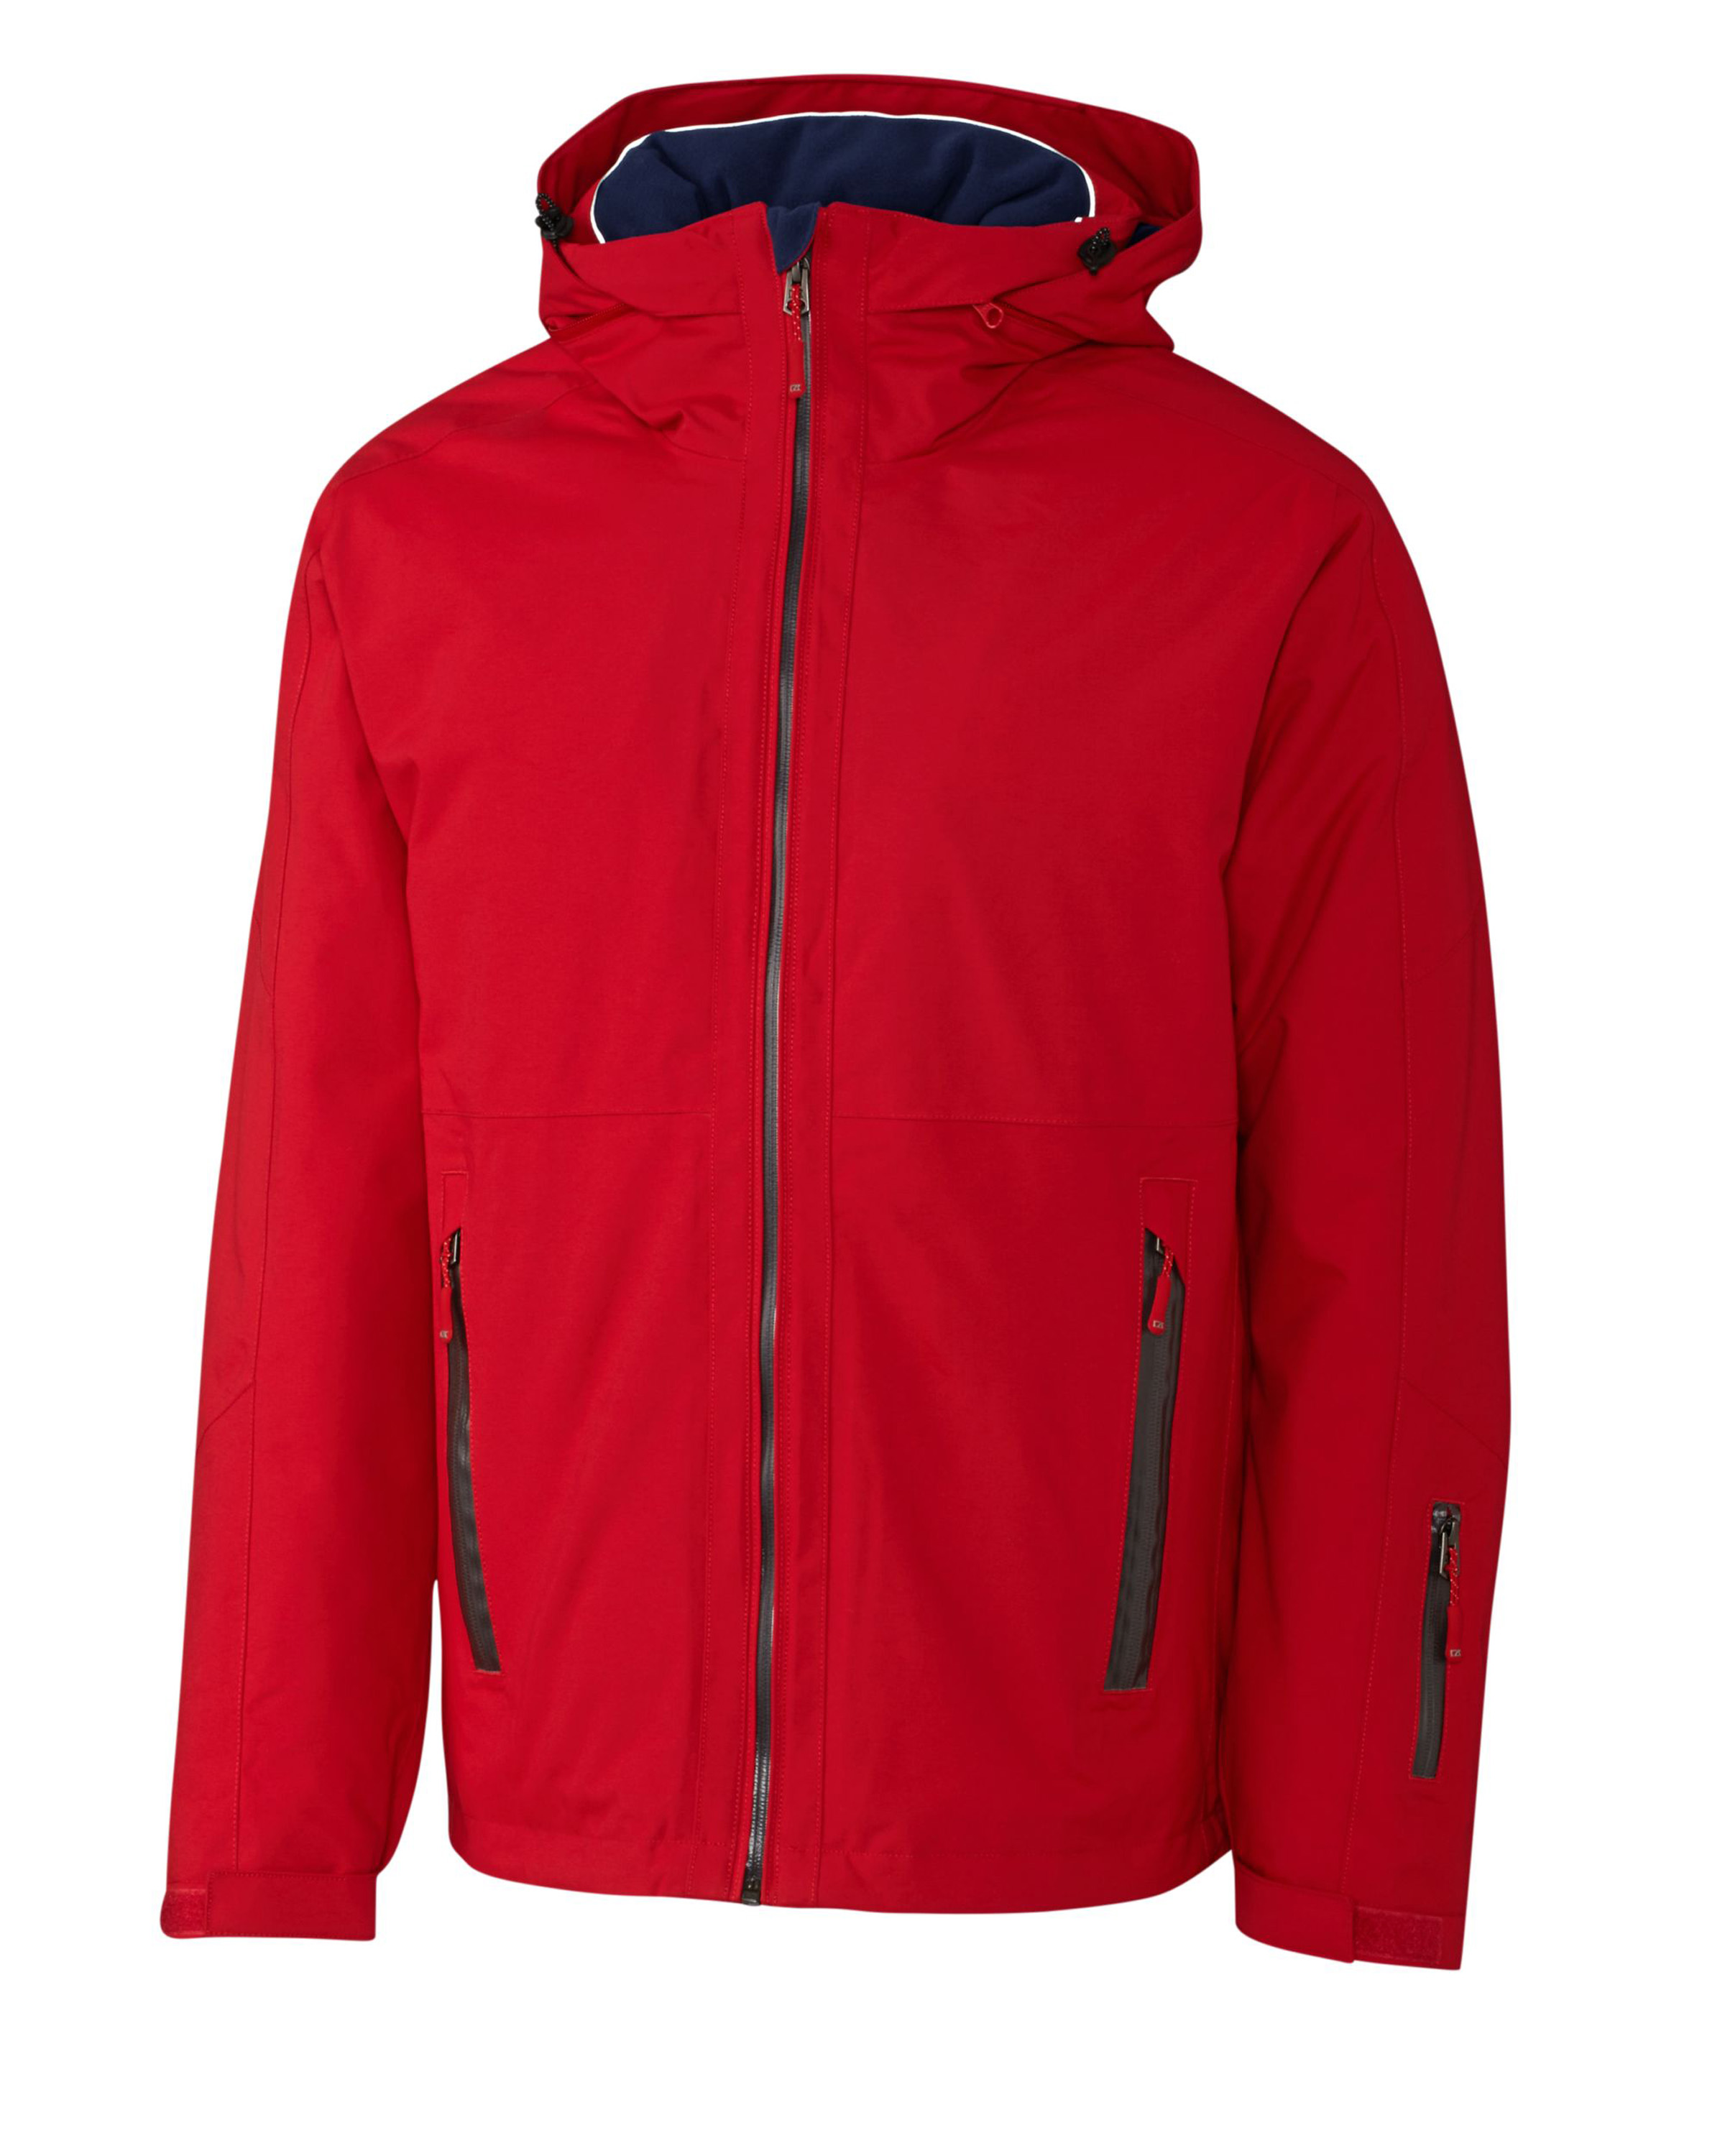 Cutter & Buck Men's Big and Tall Alpental Jacket, Legacy Red - 4XB - image 1 of 3